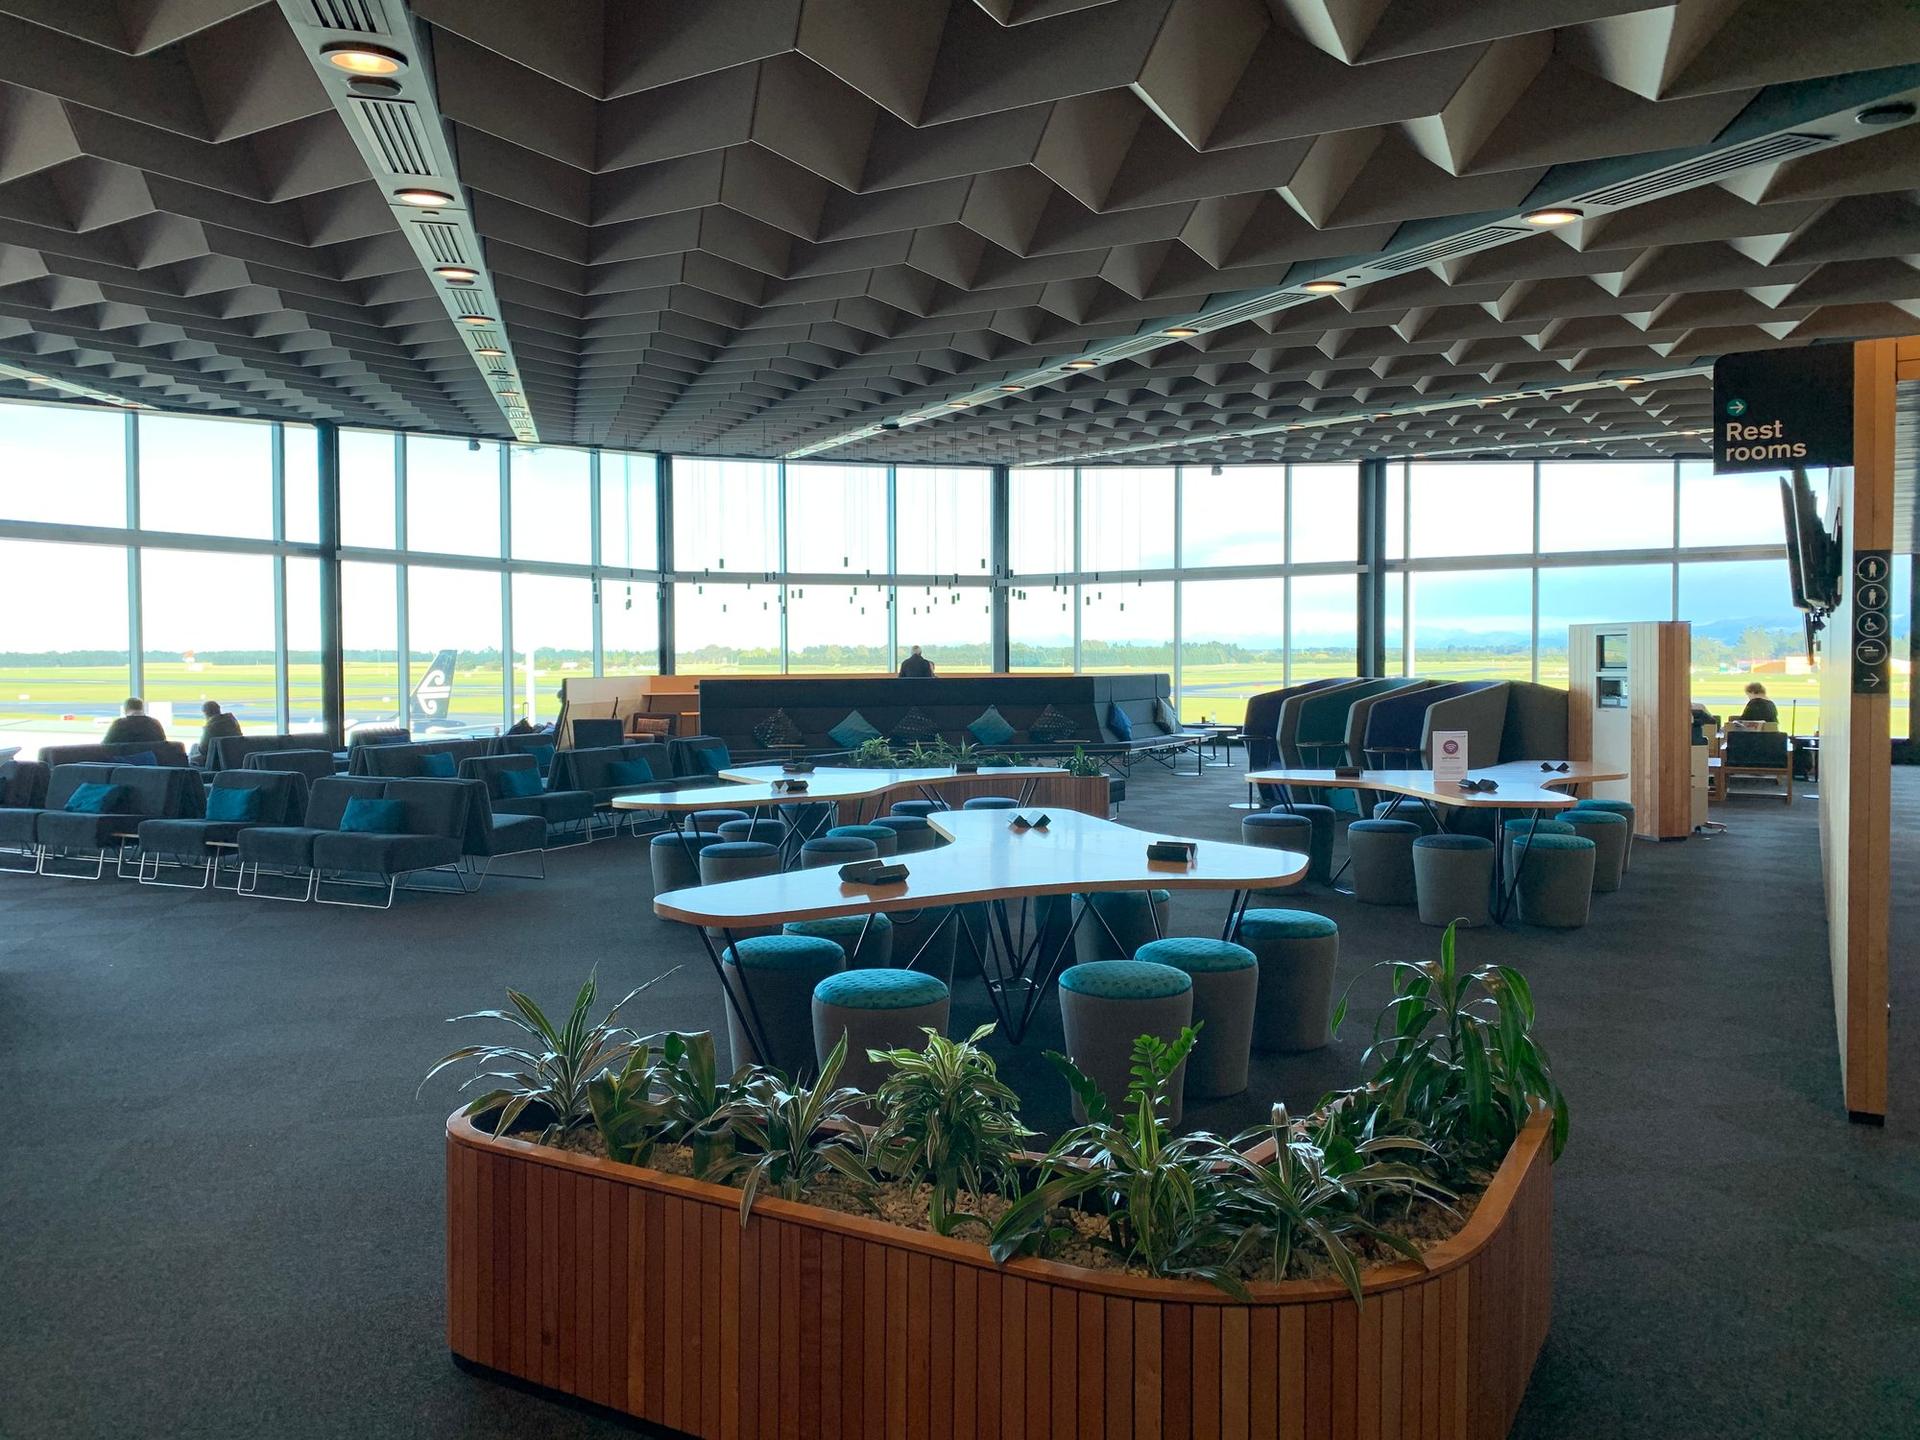 Air New Zealand Domestic Lounge image 5 of 6